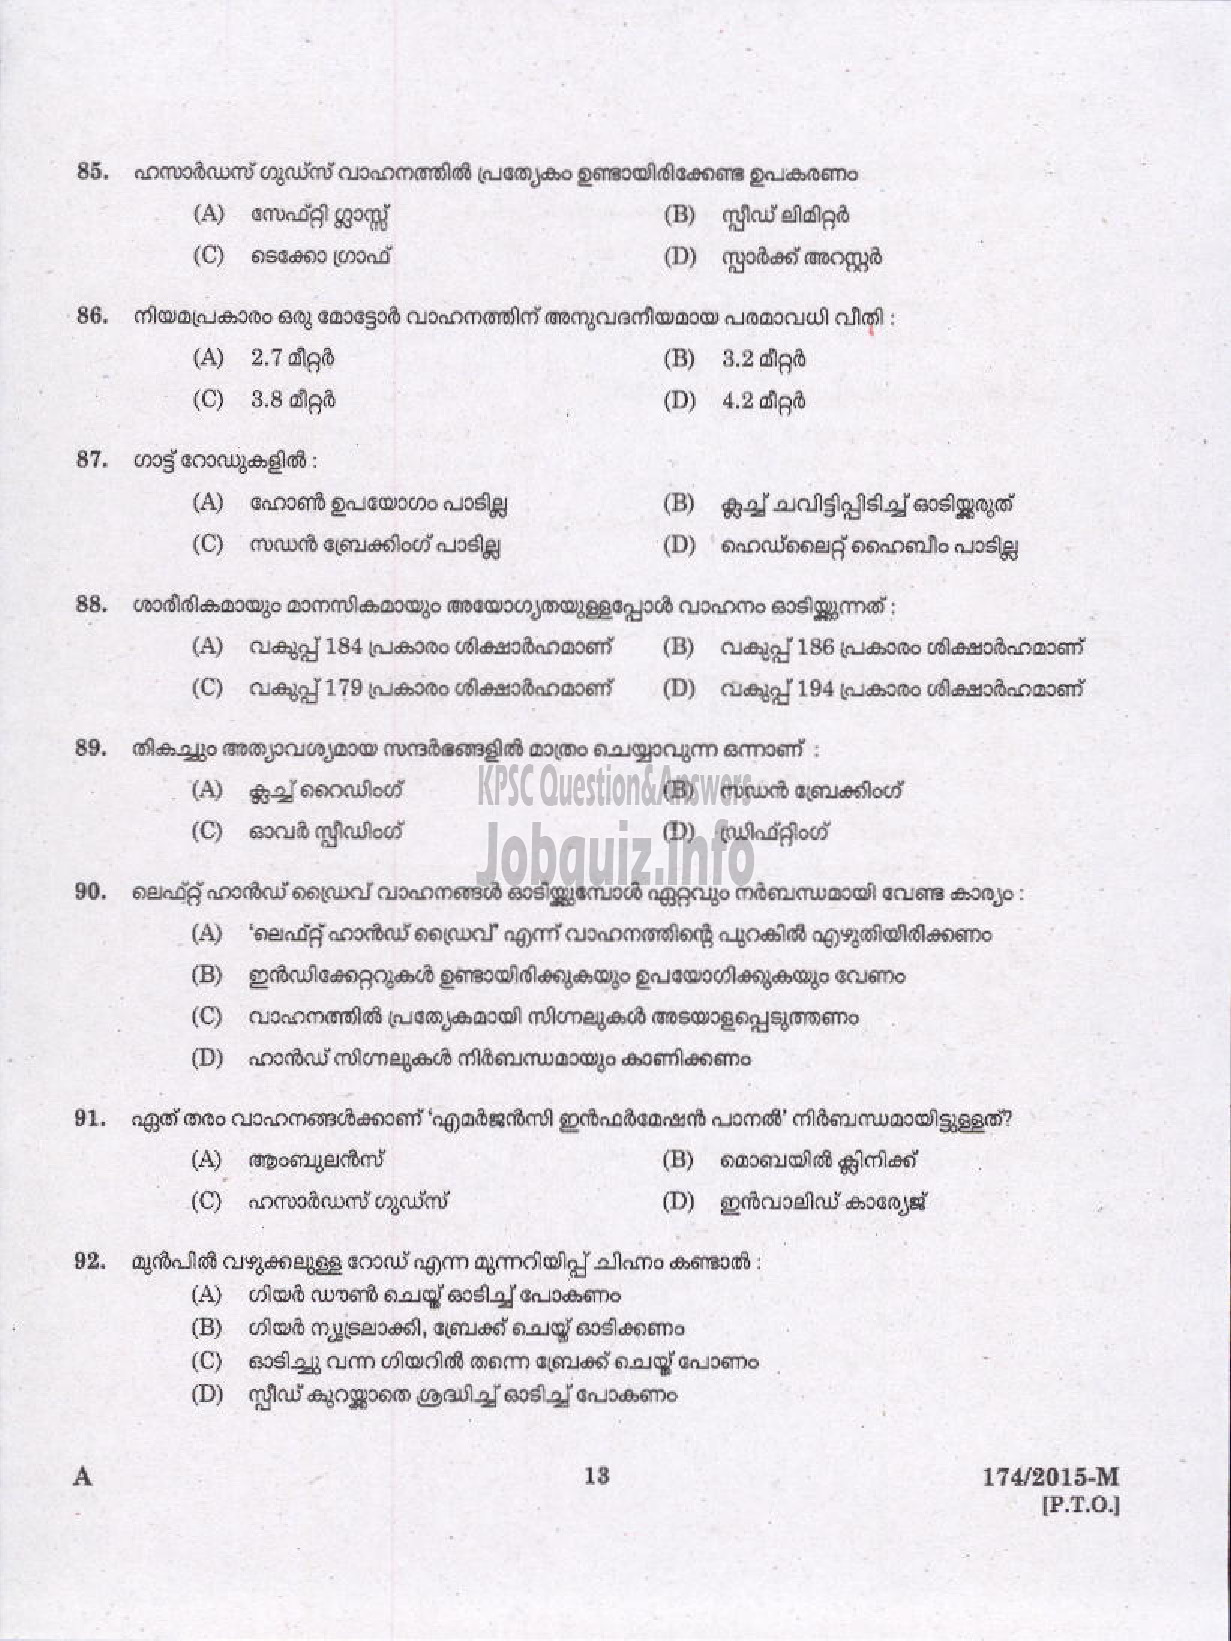 Kerala PSC Question Paper - DRIVER GRADE GR II HDV VARIOUS/EXCISE ( Malayalam ) -11